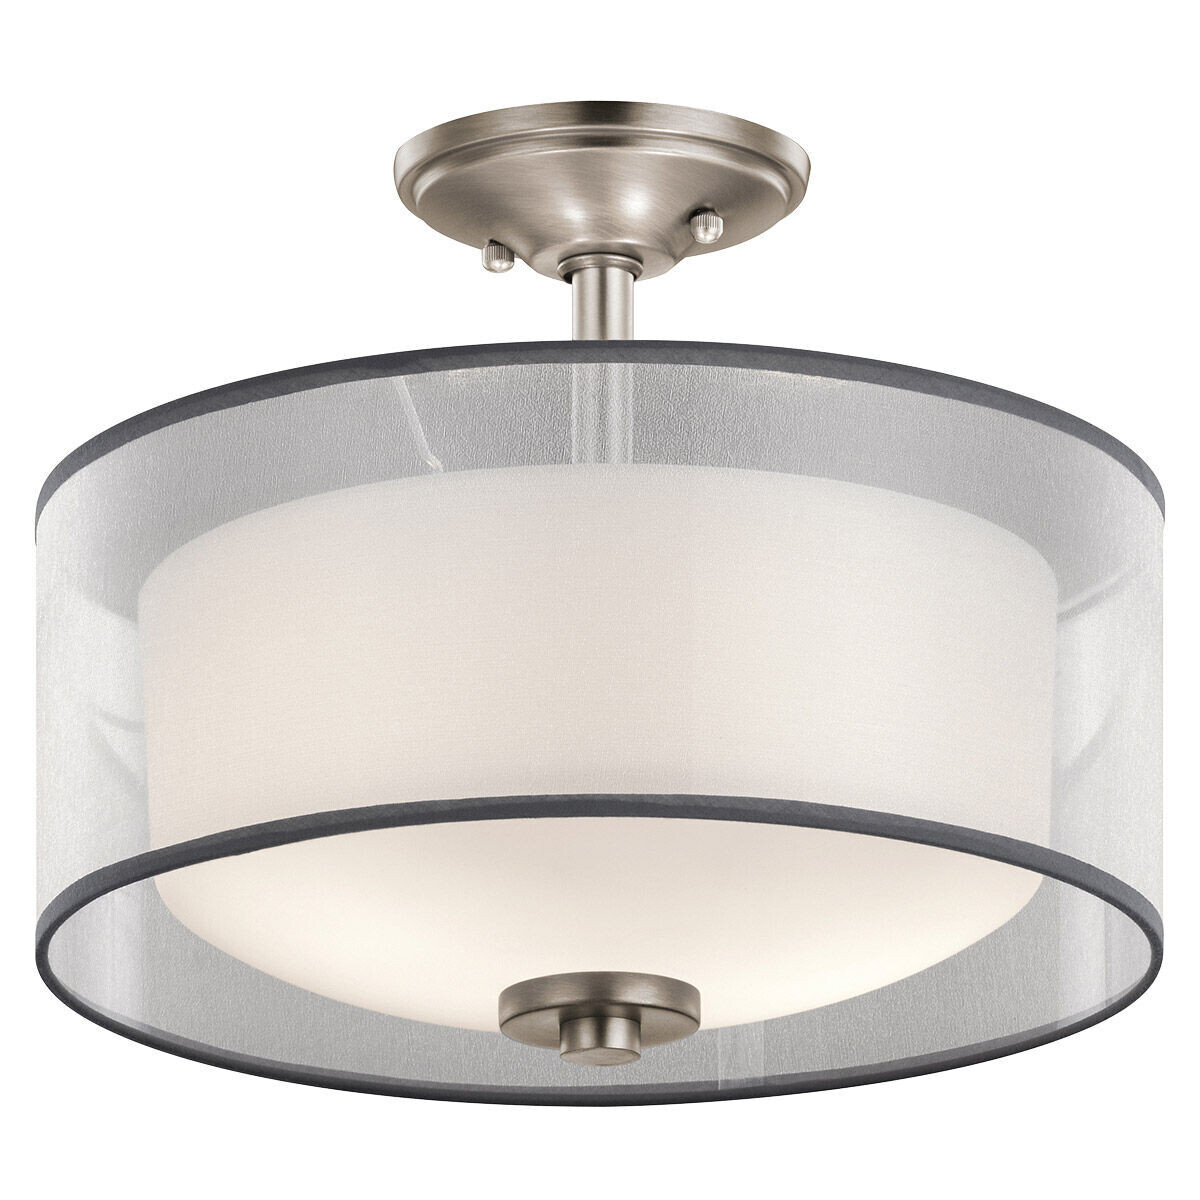 Tallie 13.5" 2 Light Semi Flush with Satin Etched White Inner Diffuser and White Translucent Organza Shade